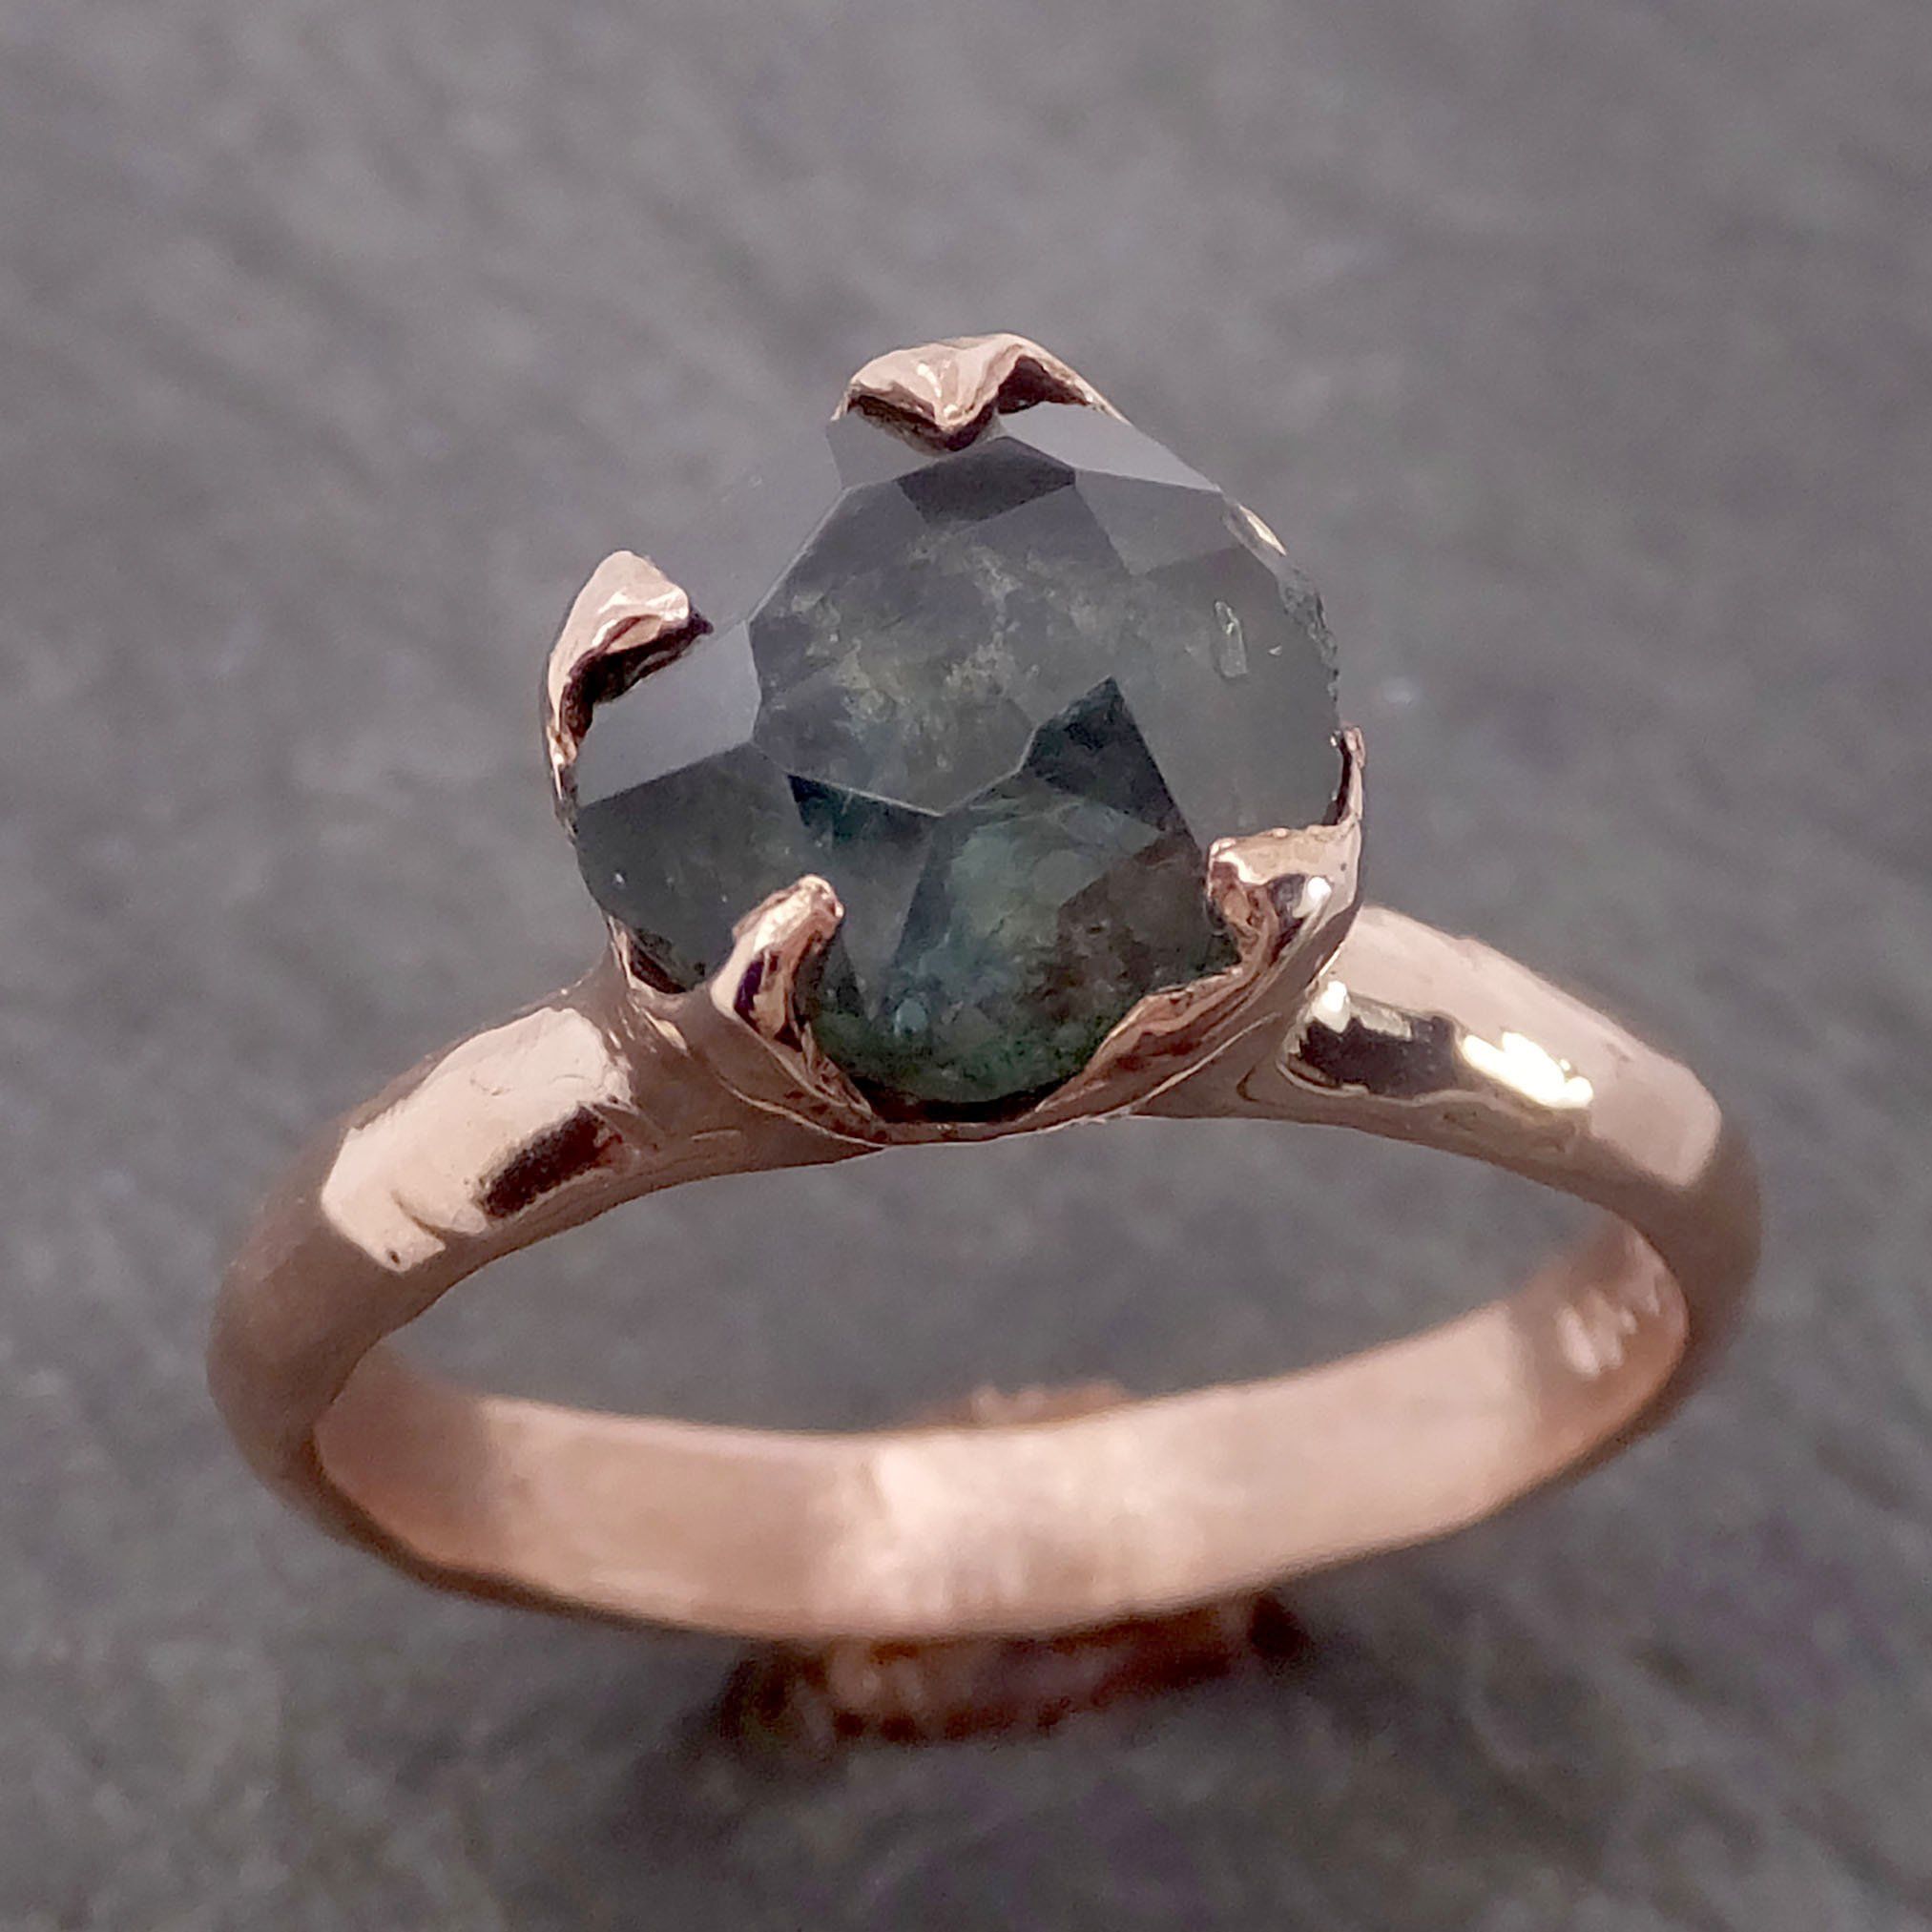 montana sapphire partially faceted solitaire 14k rose gold engagement ring wedding ring custom one of a kind blue gemstone ring 2138 Alternative Engagement